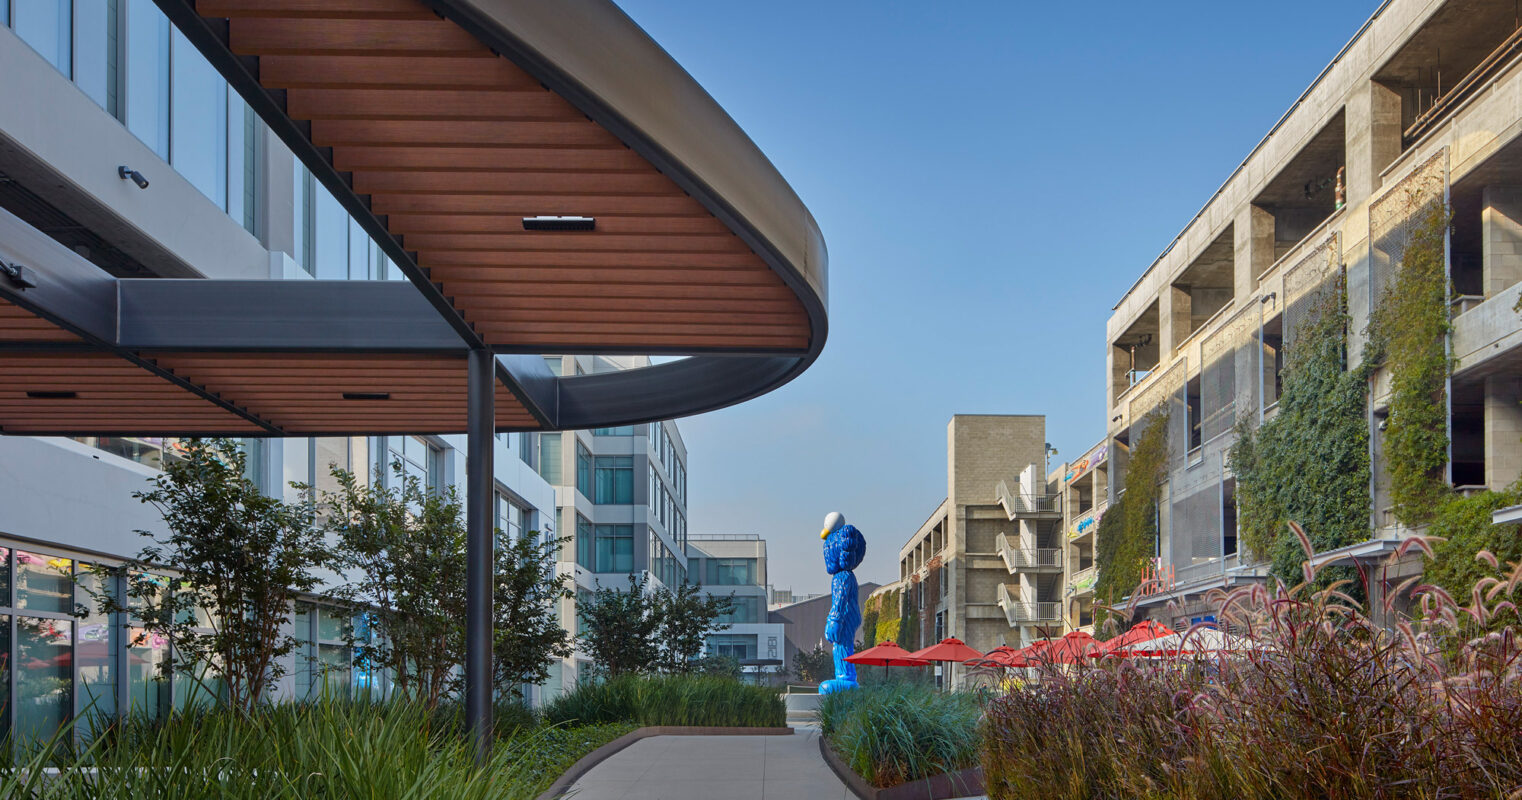 Modern mixed-use development with sweeping curved roofline, incorporating natural wood and concrete with landscaped green walkways, juxtaposed by a dynamic blue sculpture, enhancing the aesthetic and pedestrian experience.